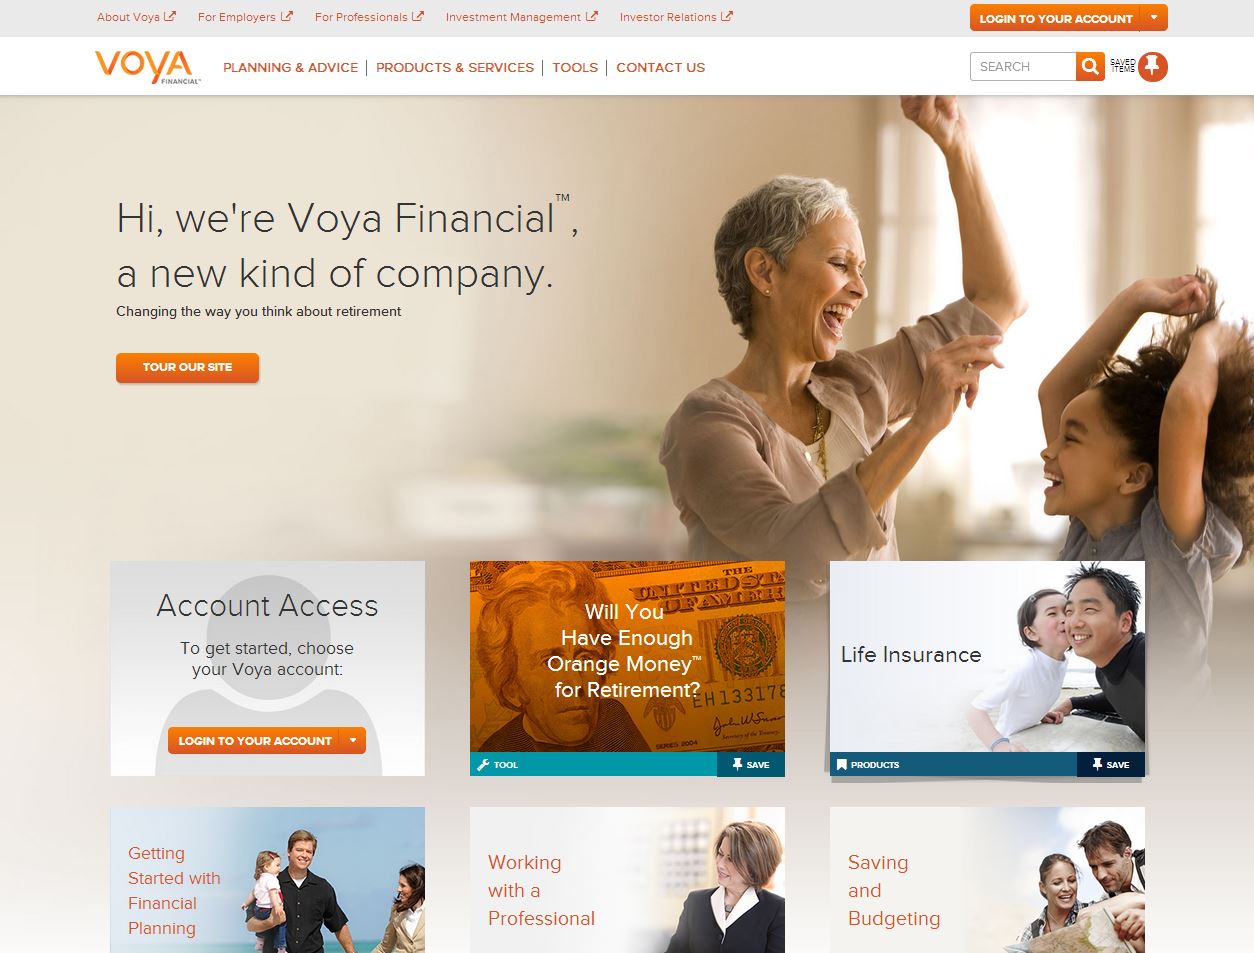 Voya.com has been designed to deliver an innovative consumer experience while showcasing Voya Financial as a new kind of financial services company.